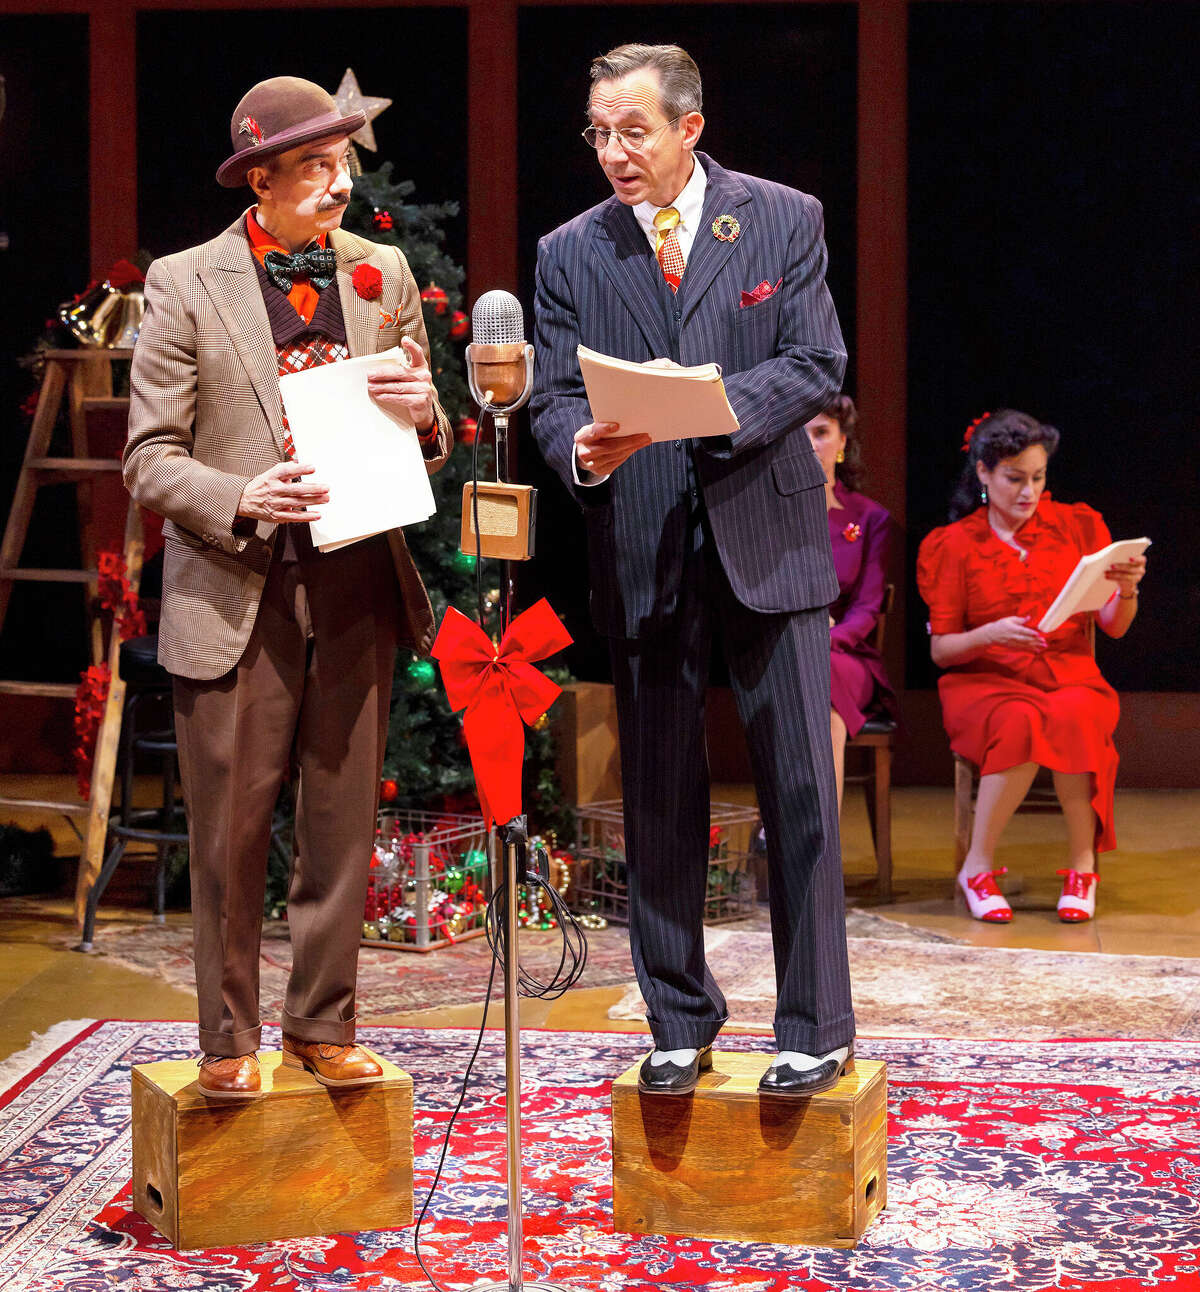 "It's a Wonderful Life" is playing at Hartford Stage through Dec. 24.